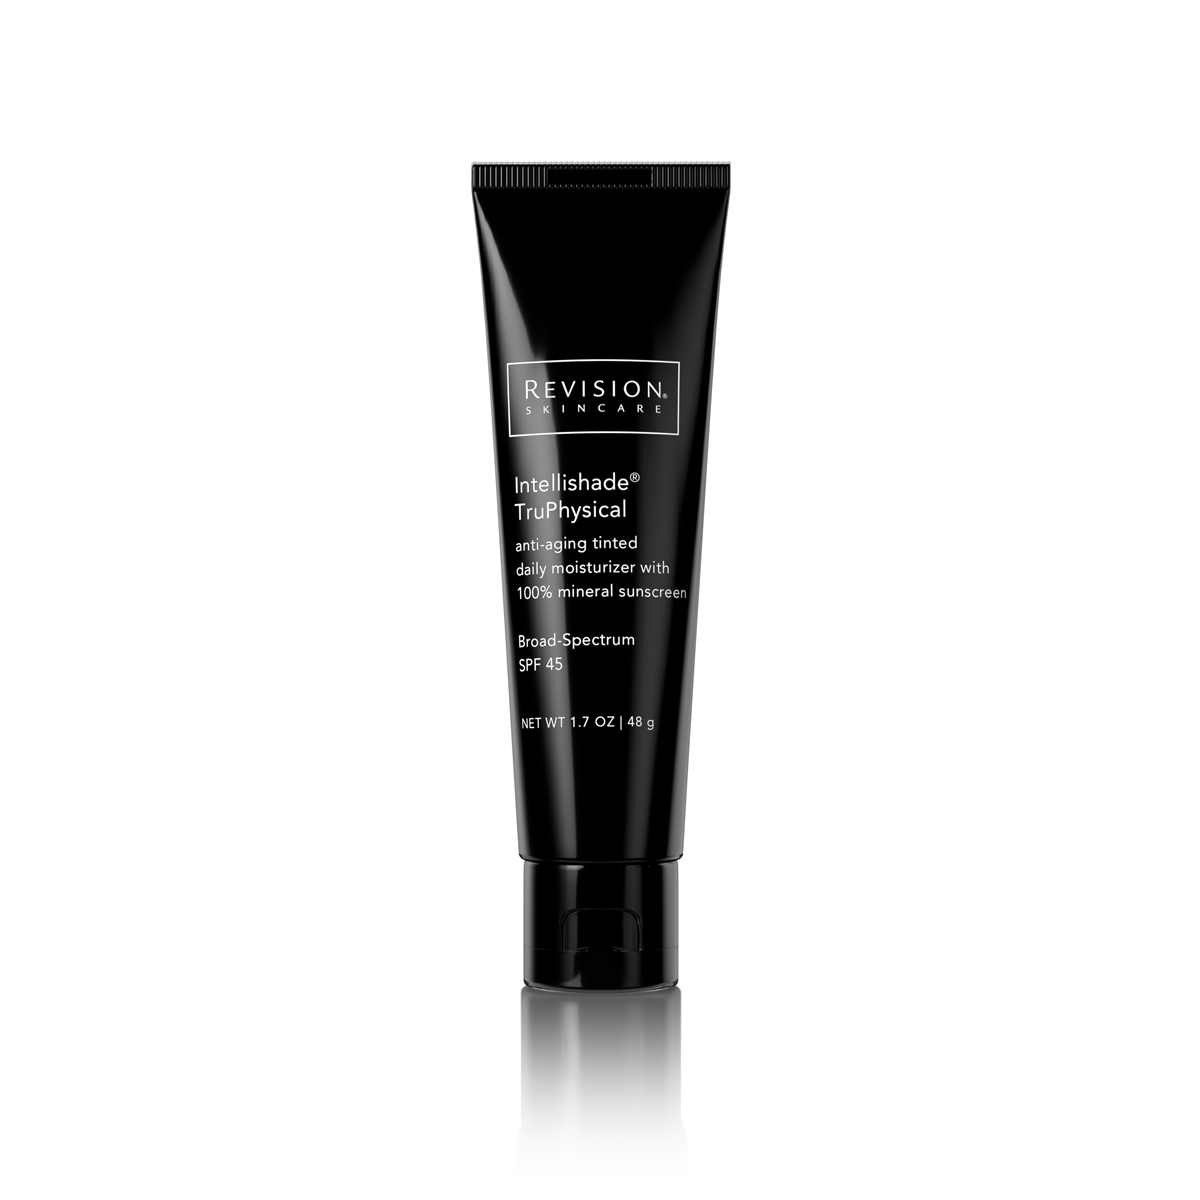 Revision Skincare Intellishade TruPhysical from MyExceptionalSkinCare.com Product Front